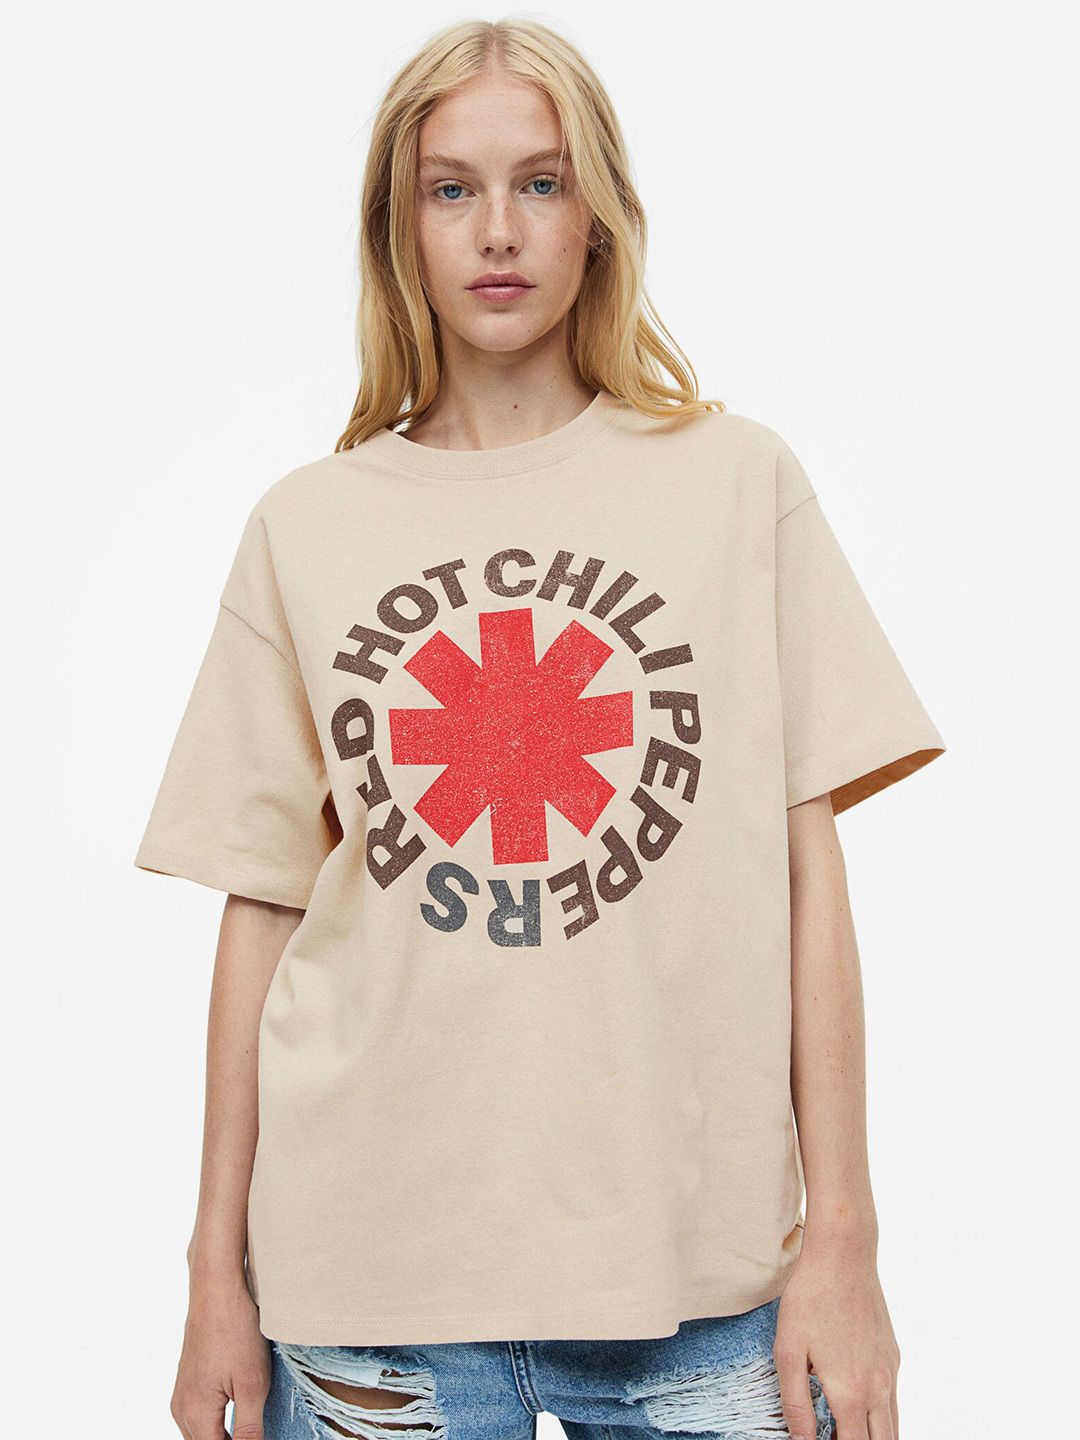 H&M Oversized Printed Pure Cotton T-shirt Price in India